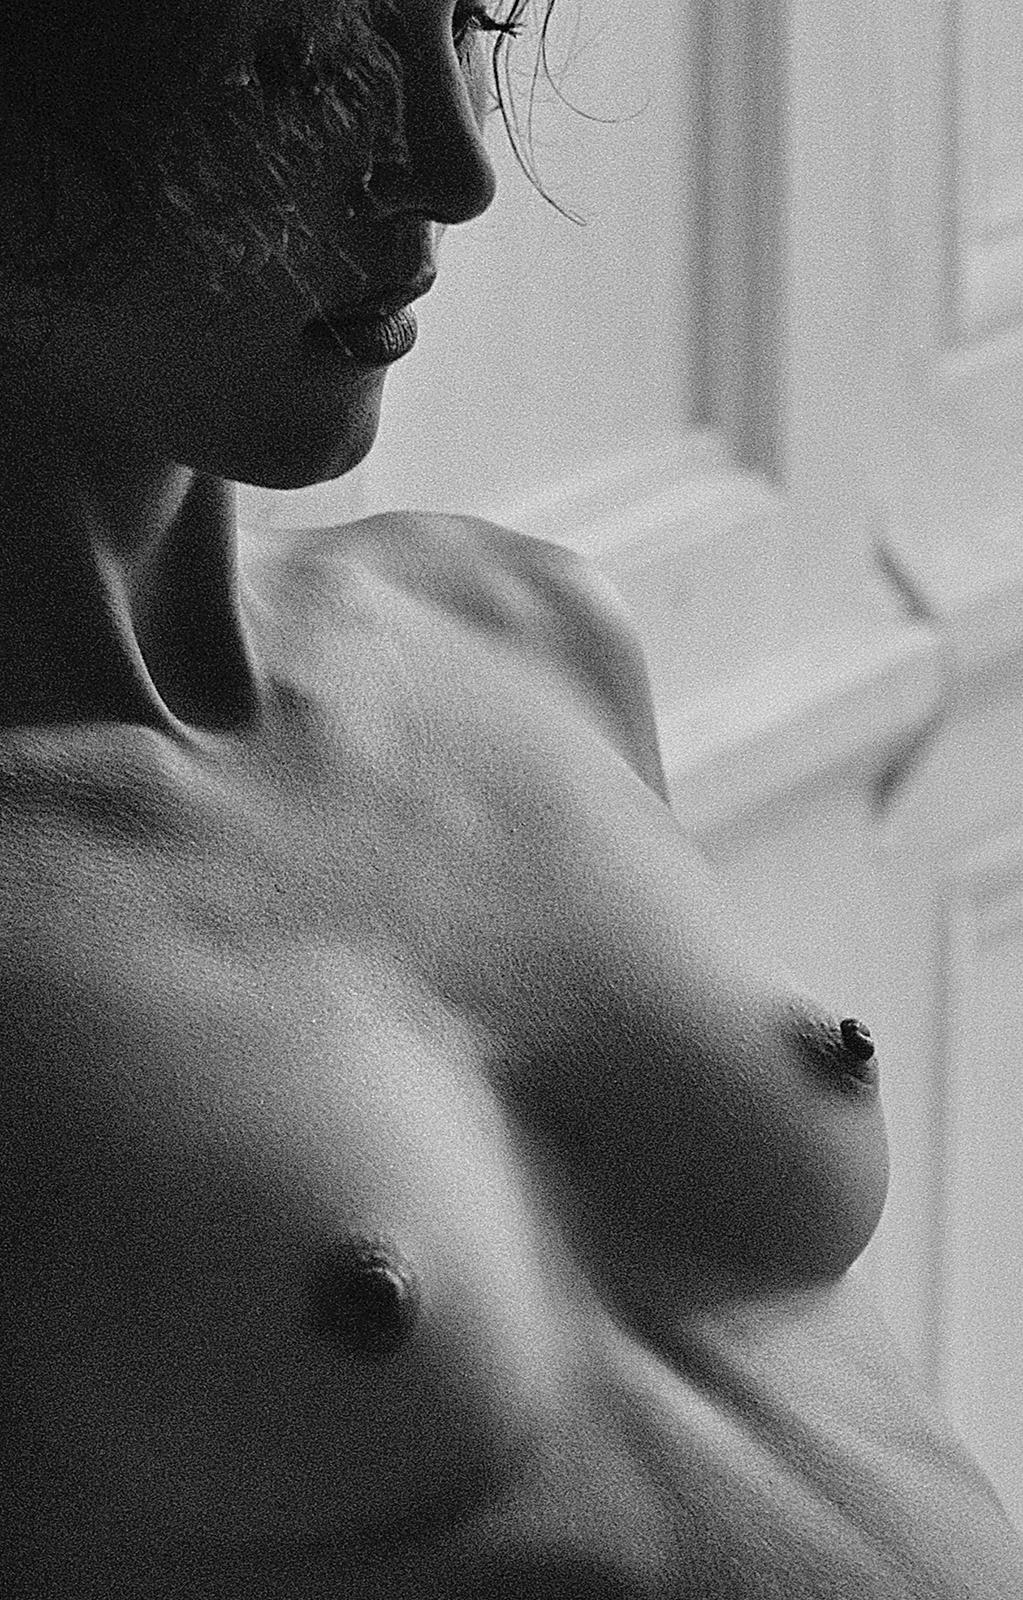 Marion-Signed limited edition nude print, Black white photo, Sensual, Contemporary - Photograph by Ian Sanderson